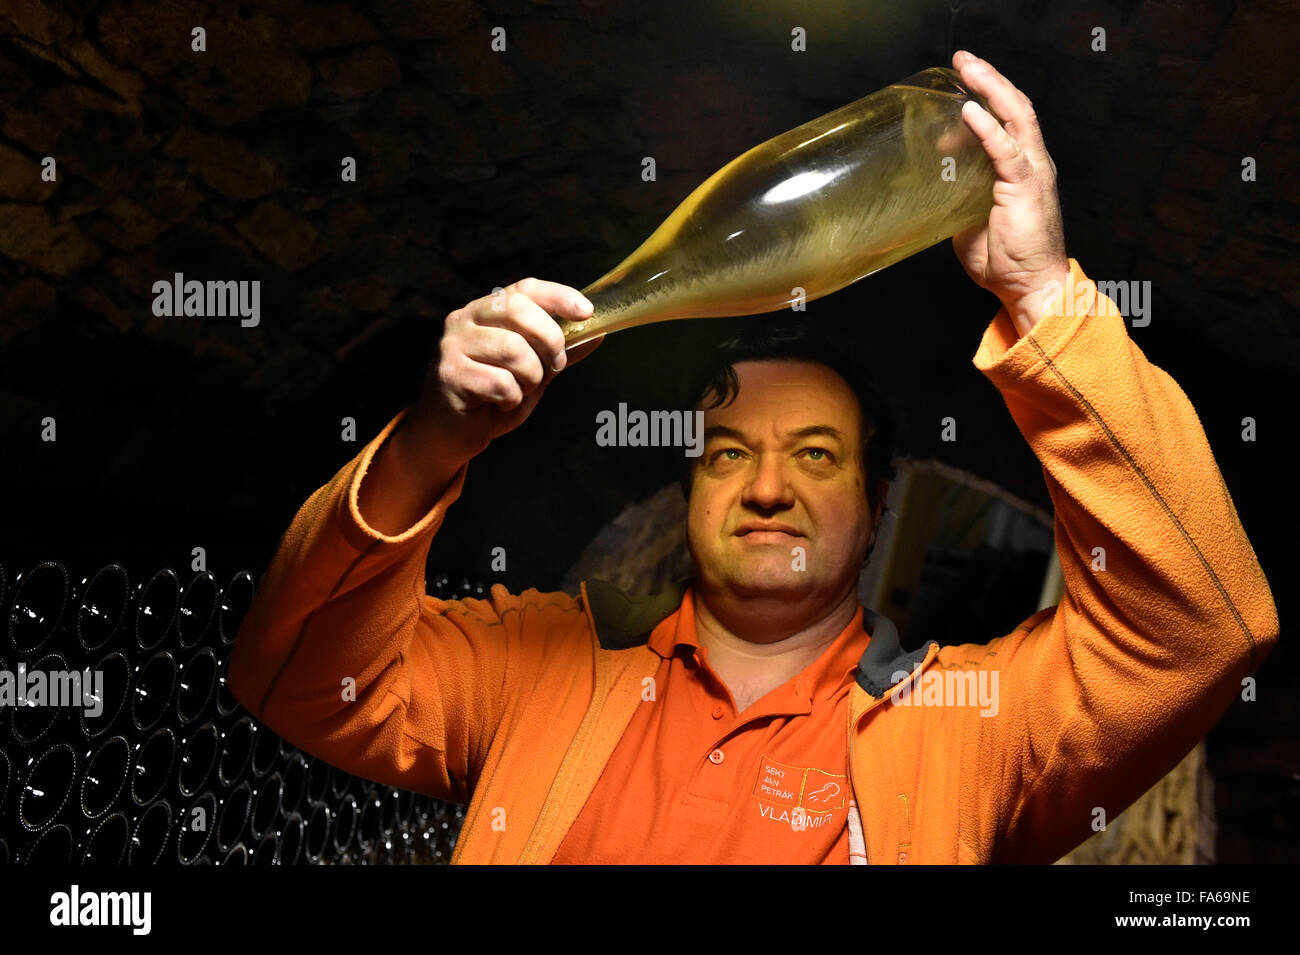 Vladimir Hribal (pictured) and his wife are the second generation of producers of the sparkling wine made from mostly ecologically grown hand-picked grapes. Family vinery Jan Petrak to create the most special sparkling wine, which is made using the classic Methode Champenoise - secondary fermentation in the bottle. Delicate and lasting sparkling is carried by flakes of 24 carat gold in Kobyli, Czech Republic, December 18, 2015. (CTK Photo/Vaclav Salek) Stock Photo